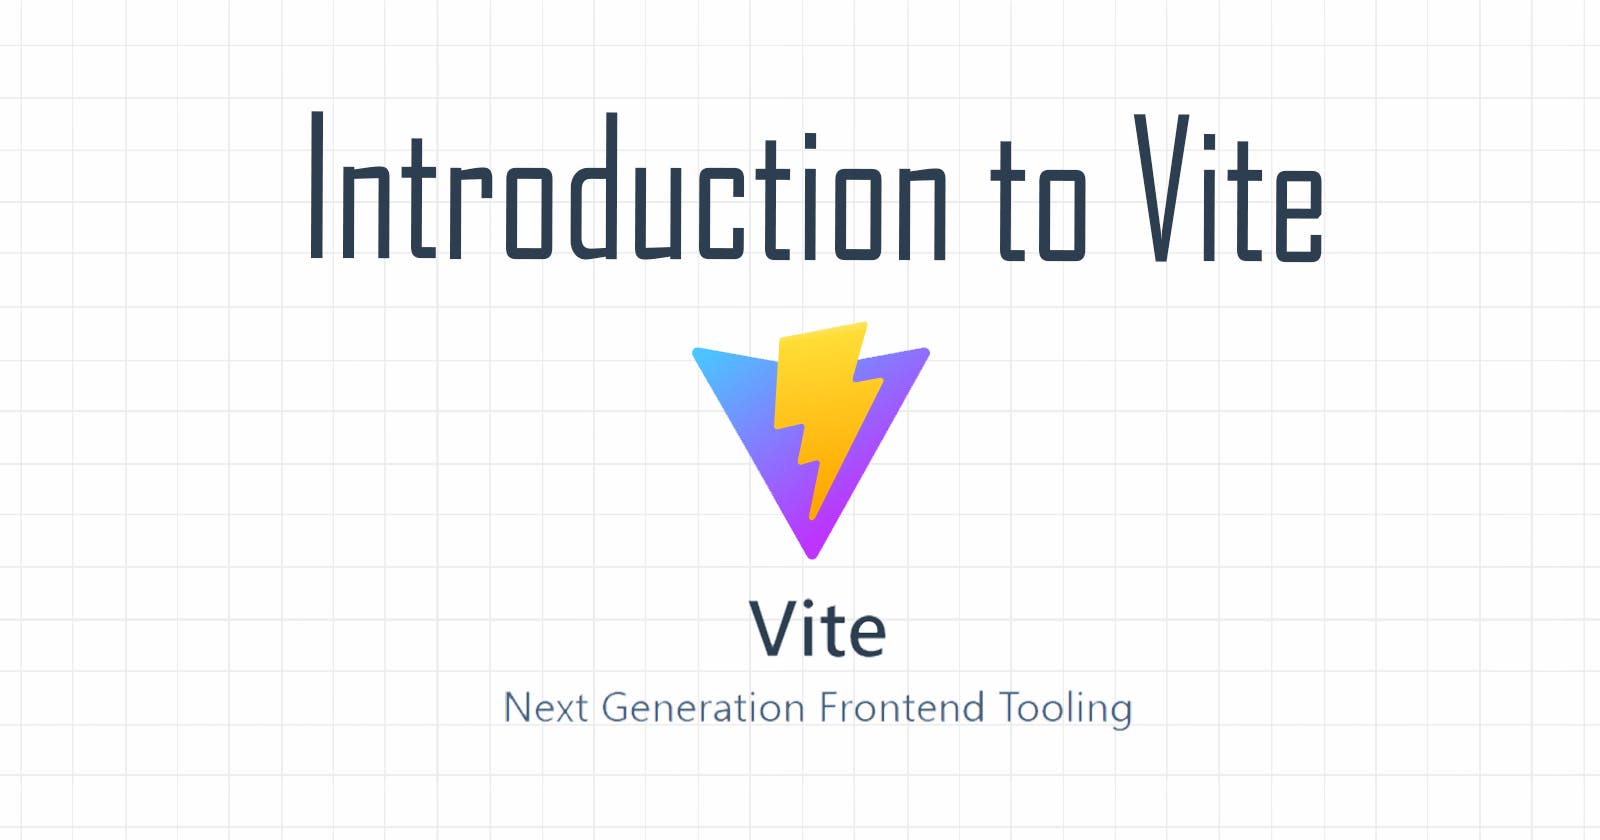 Introduction to Vite: The Next Generation Frontend Tooling